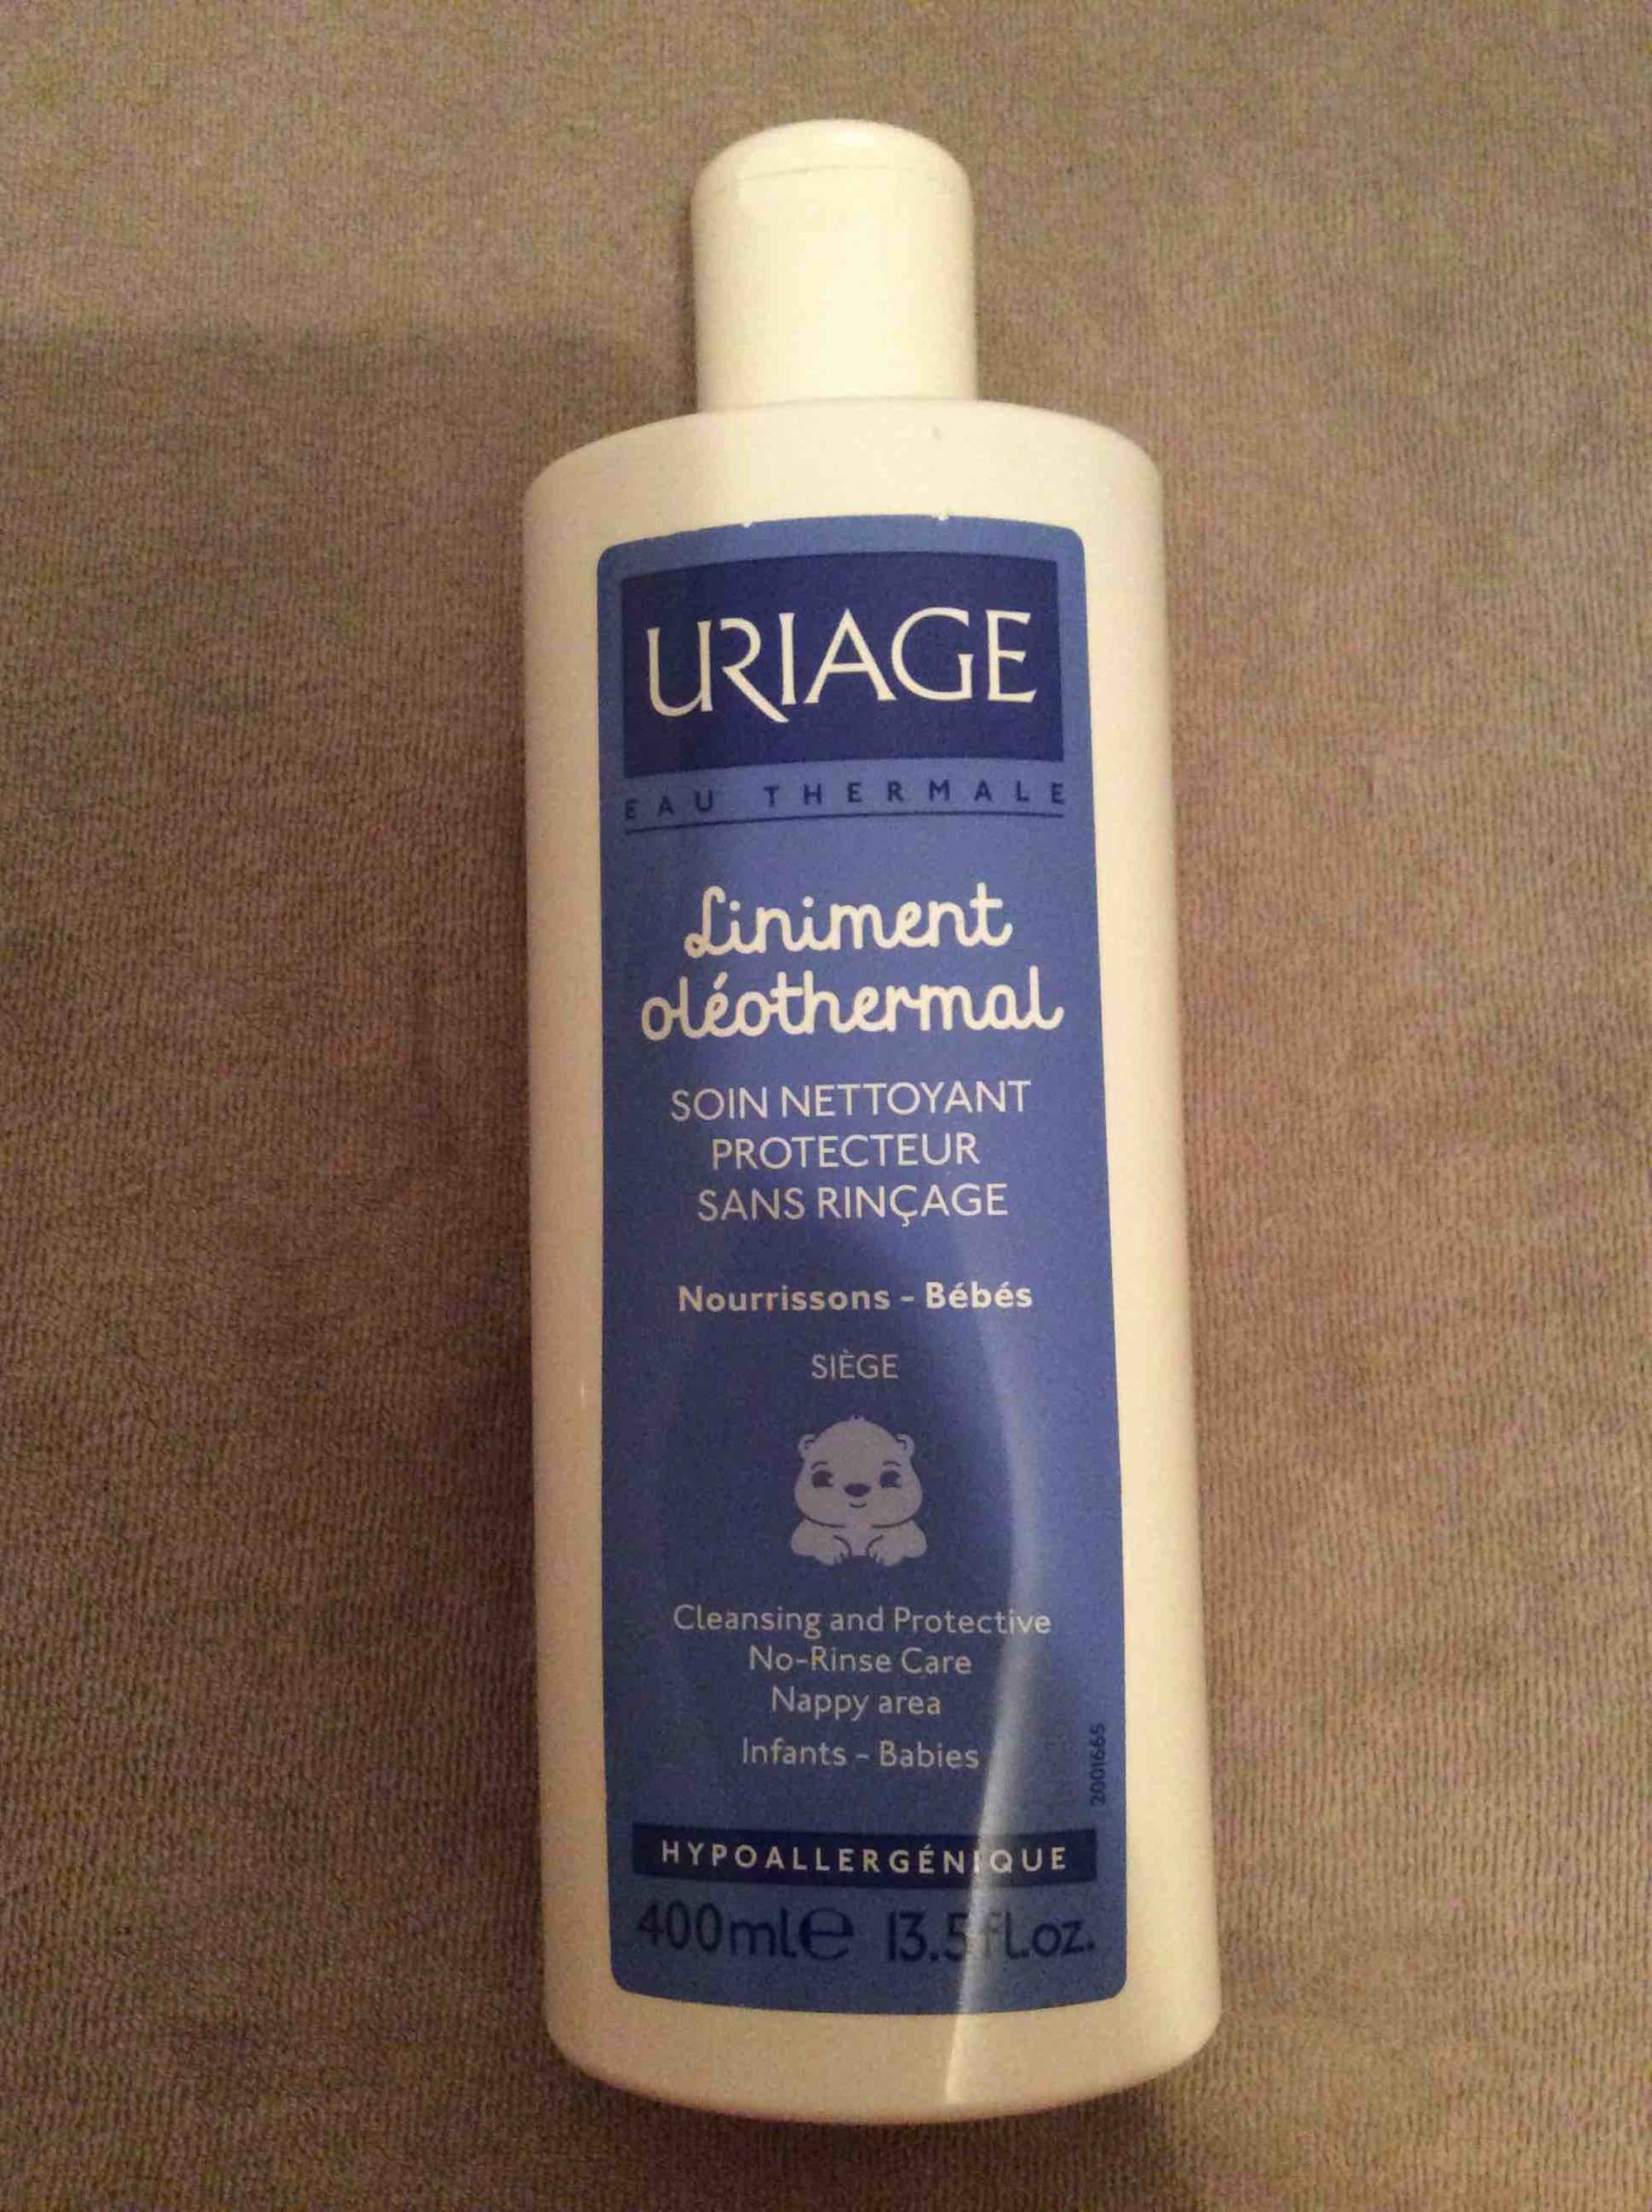 URIAGE - Liniment oléothermal - Soin nettoyant protecteur